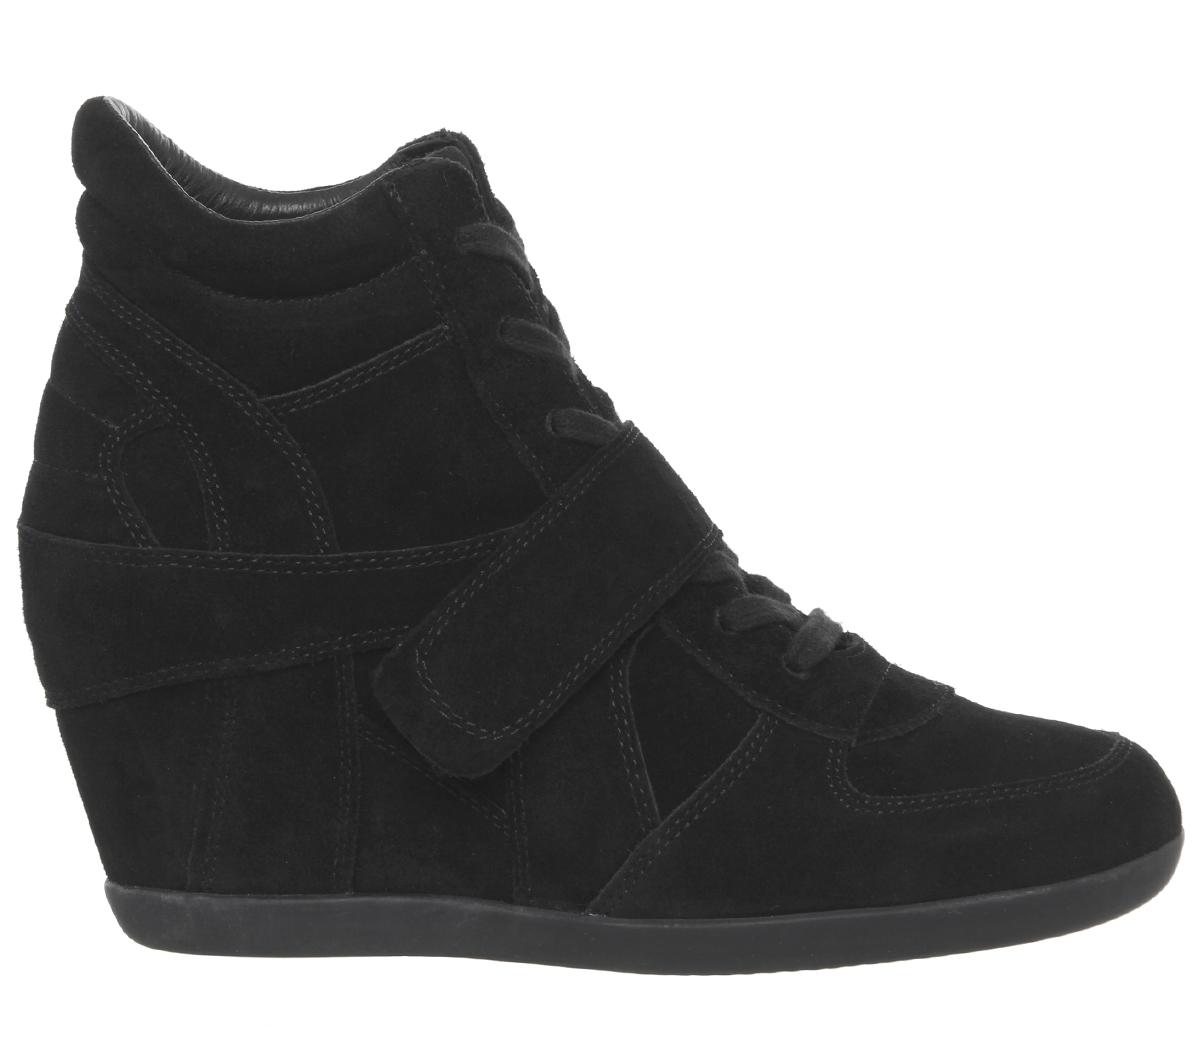 Ash Bowie Hi Top Wedge Sneaker Boots Black Suede - Women's Ankle Boots